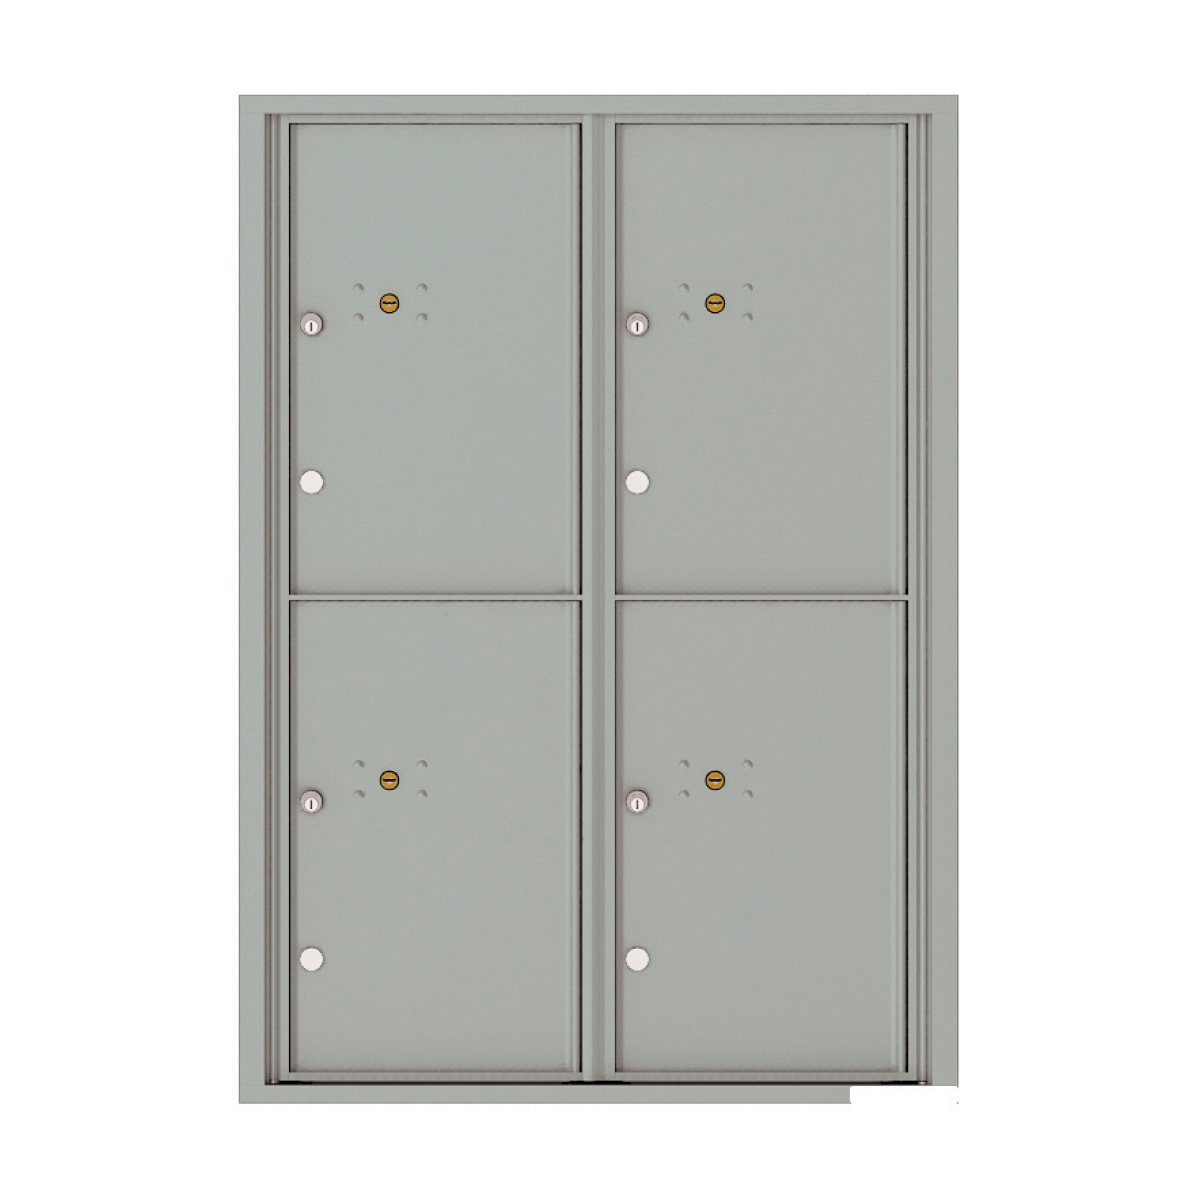 Recessed 4C Horizontal Mailbox – 4 Parcel Lockers – Front Loading – 4C12D-4P-CK25750 – Private Delivery Product Image